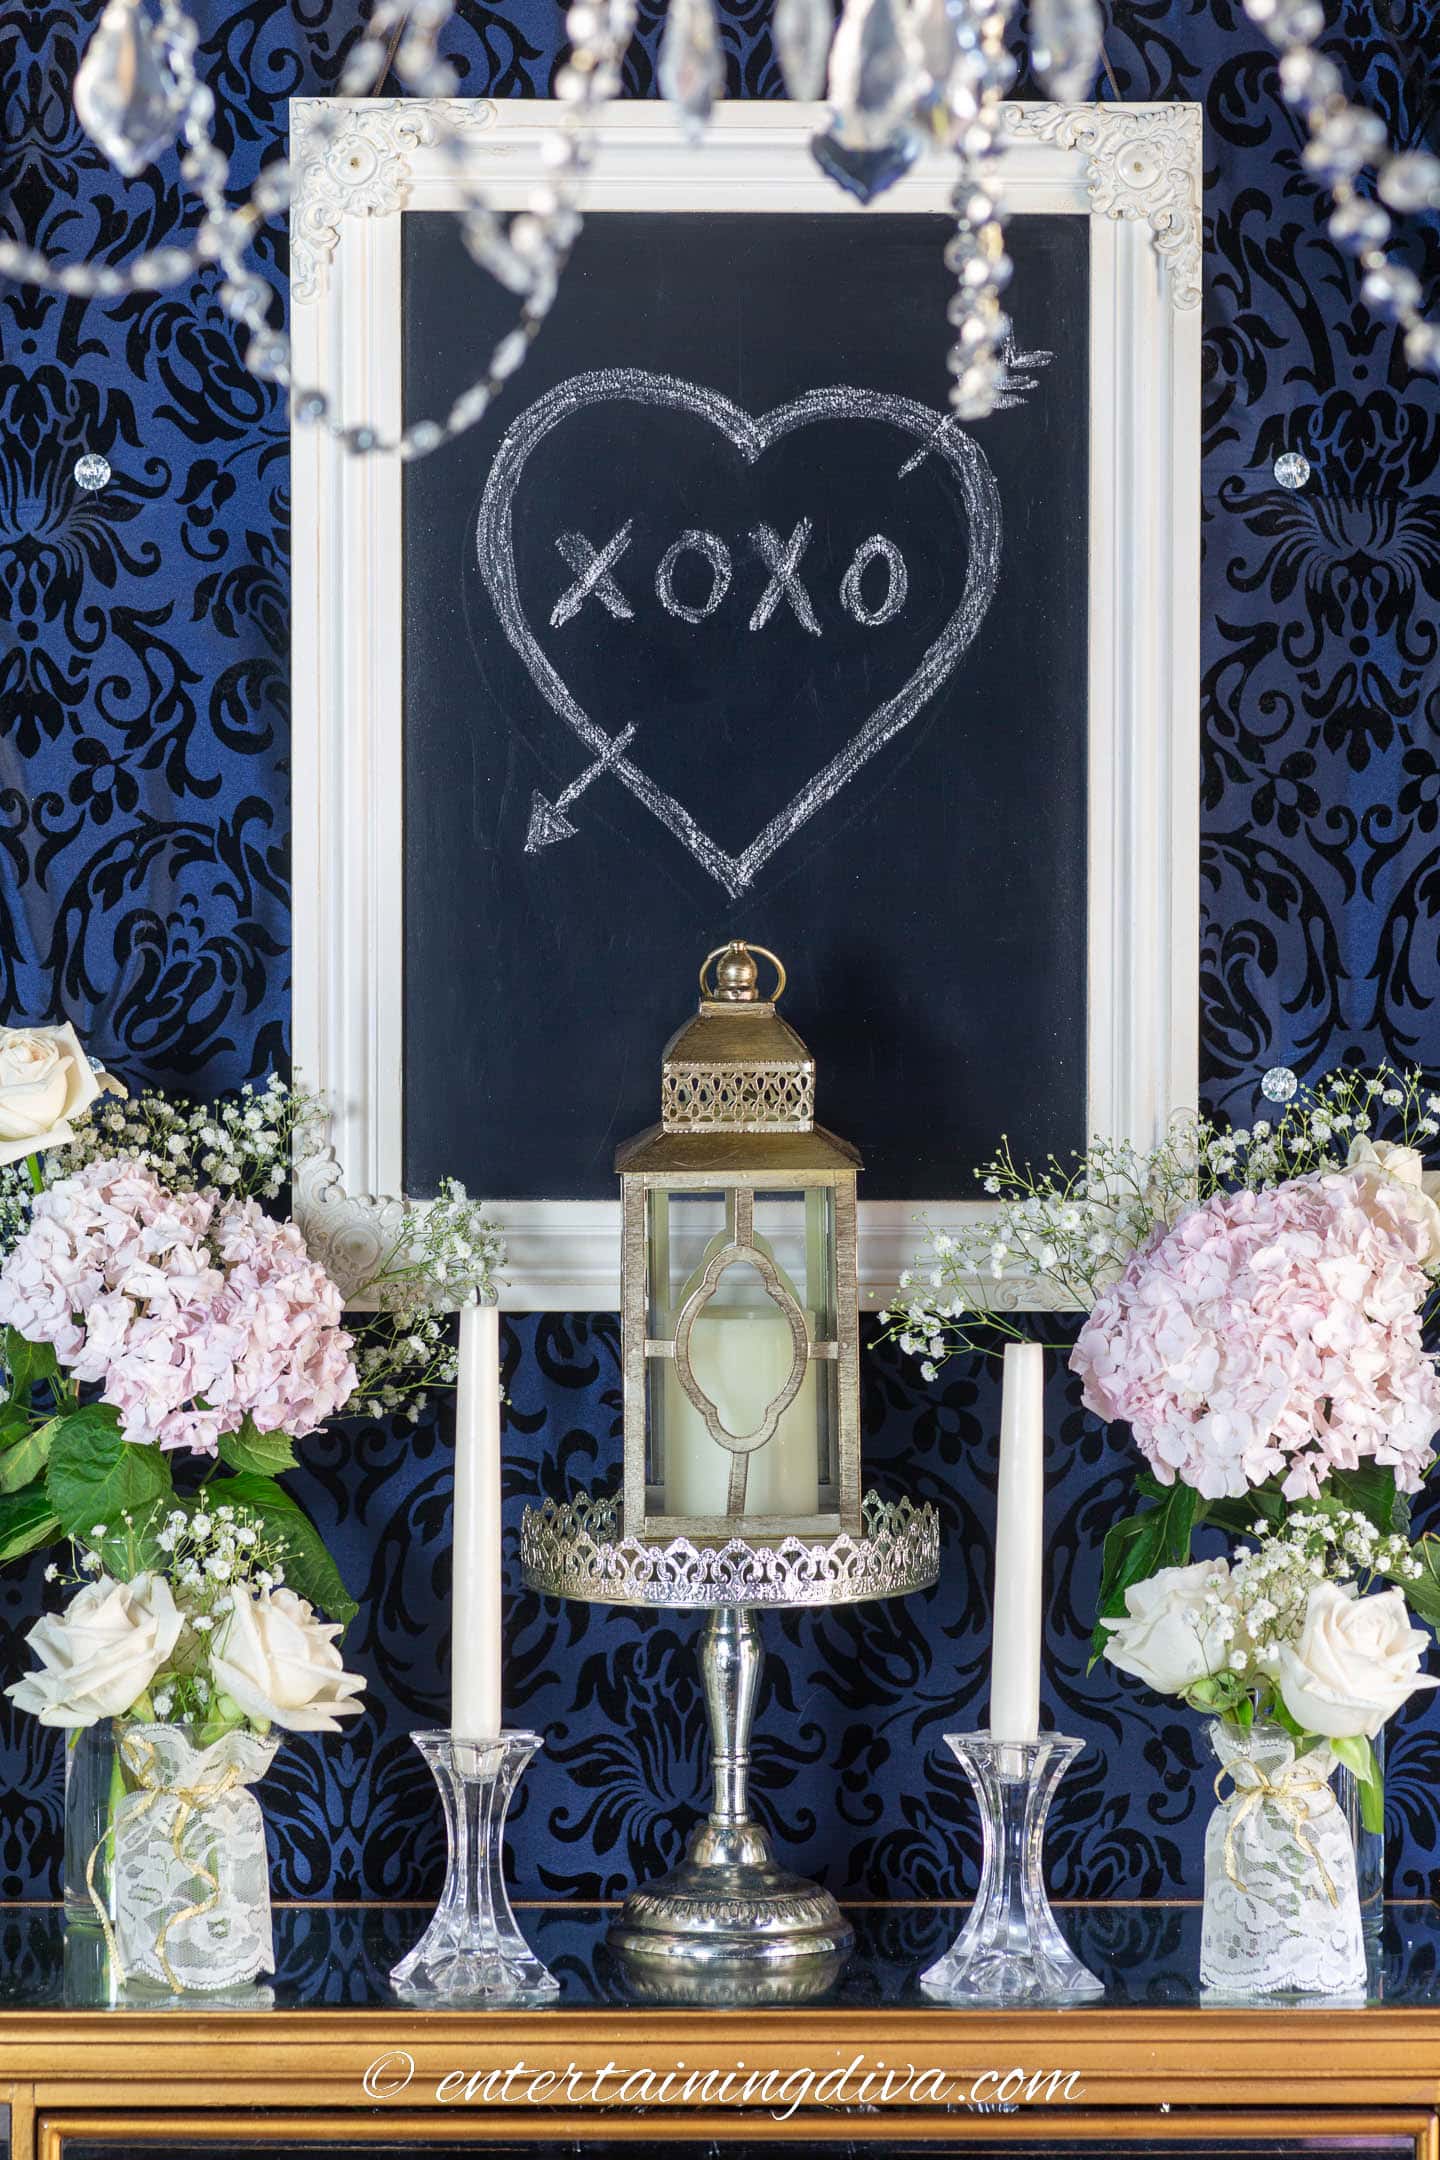 Framed chalkboard with a heart drawn in the middle above a gold candle lantern